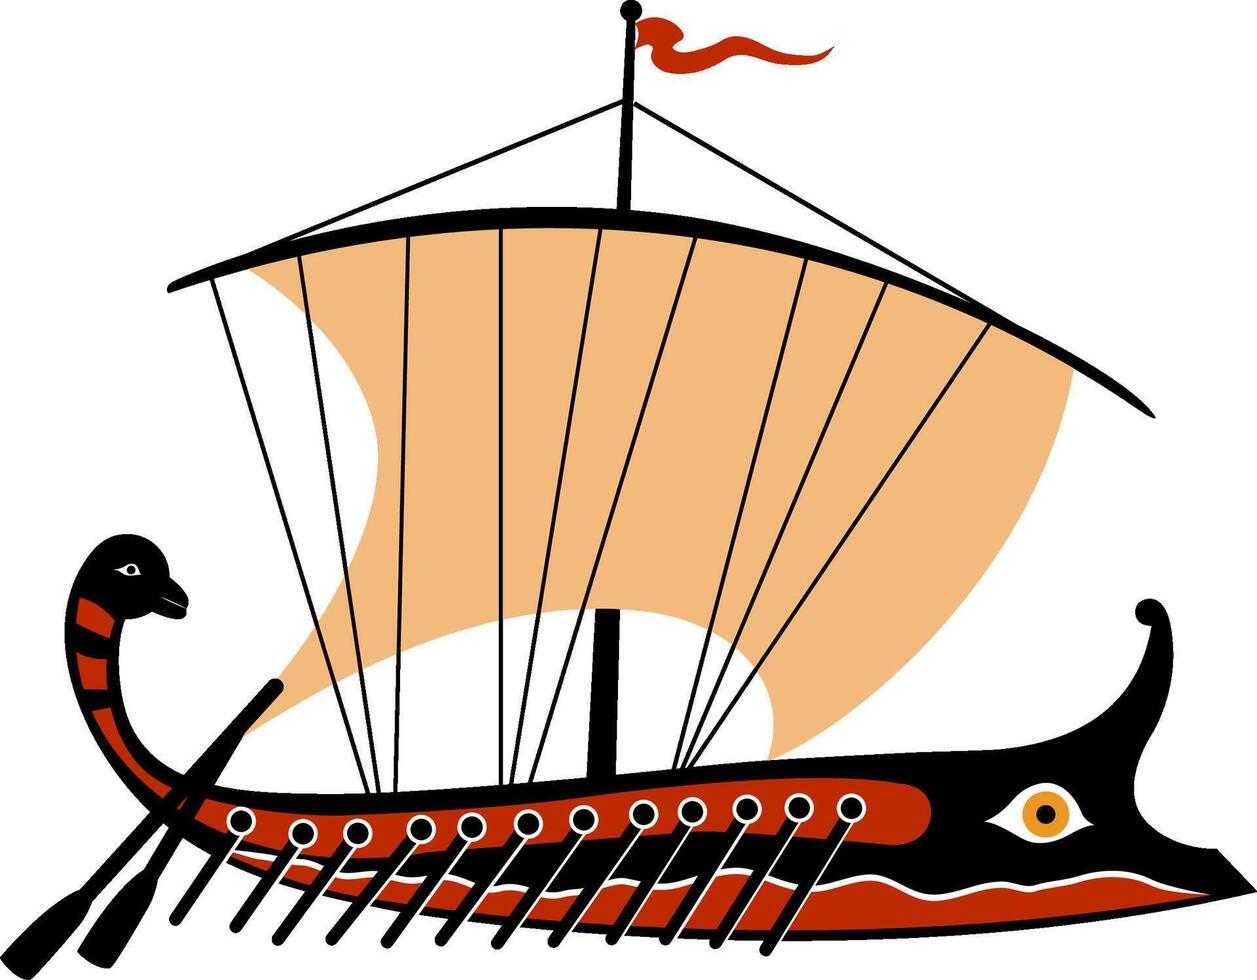 An ancient Greek trireme ship sailing on the sea. Stylized illustration of ancient Greek ship. vector